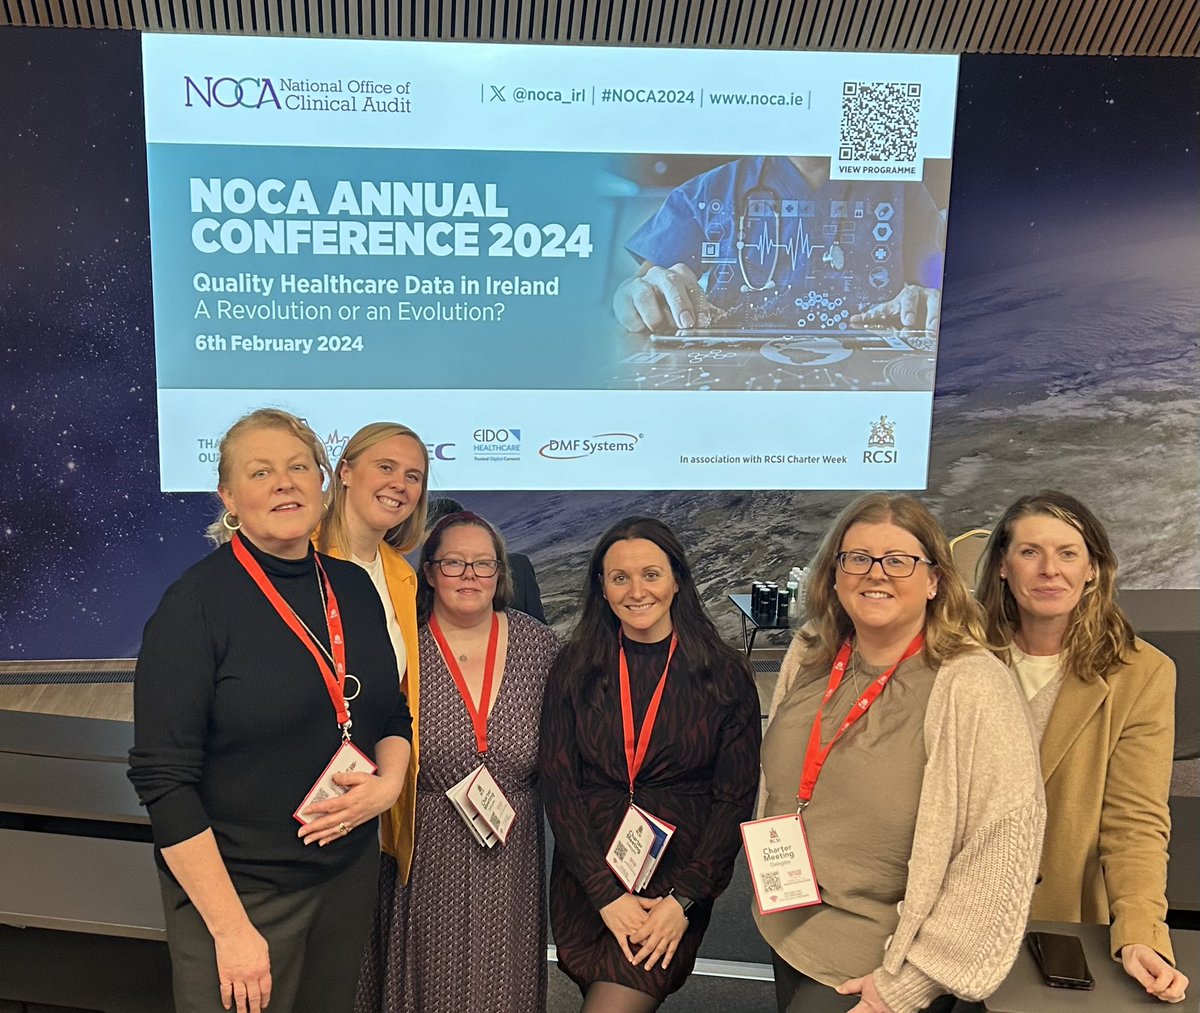 Highly commended award for the OLOL analgesia project and its multiple spin off projects. It’s a great achievement to make one of the 4 finalists out of 490 submissions. Well done to all the staff in OLOl especially the staff on our orthopaedic ward. #NOCA2024